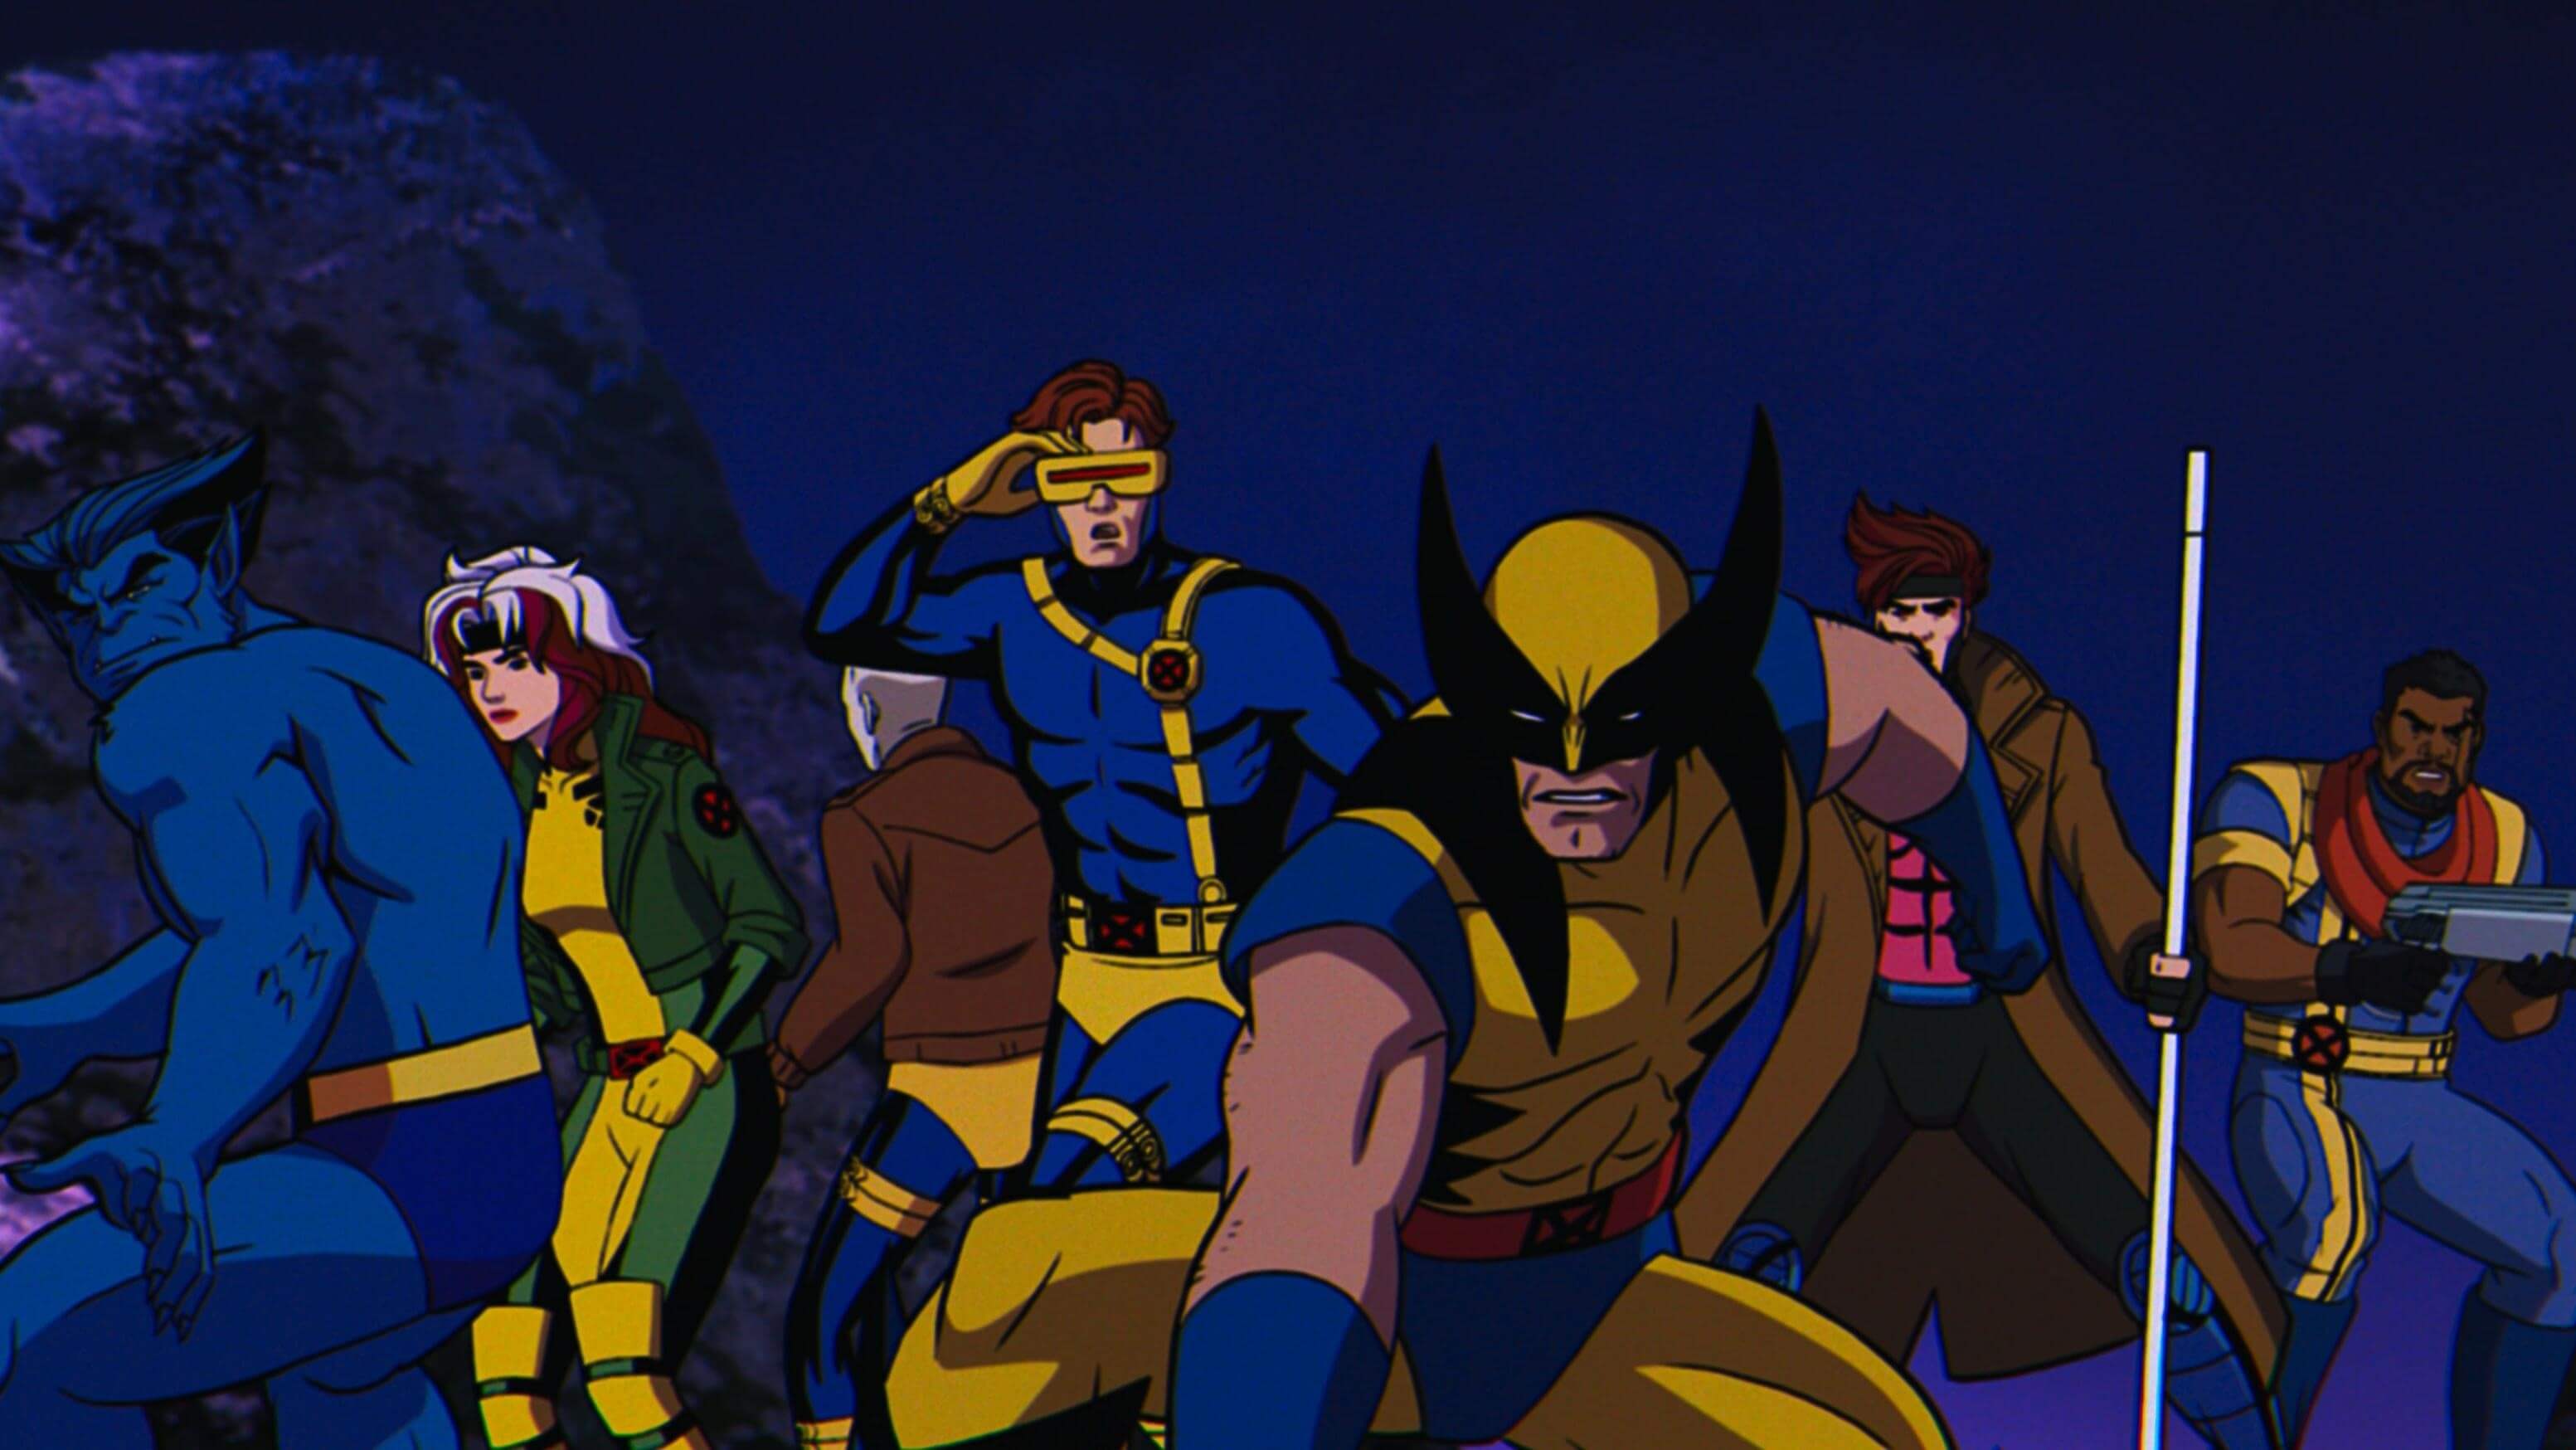 Disney suddenly fires X-Men ’97 showrunner, with no public explanation given